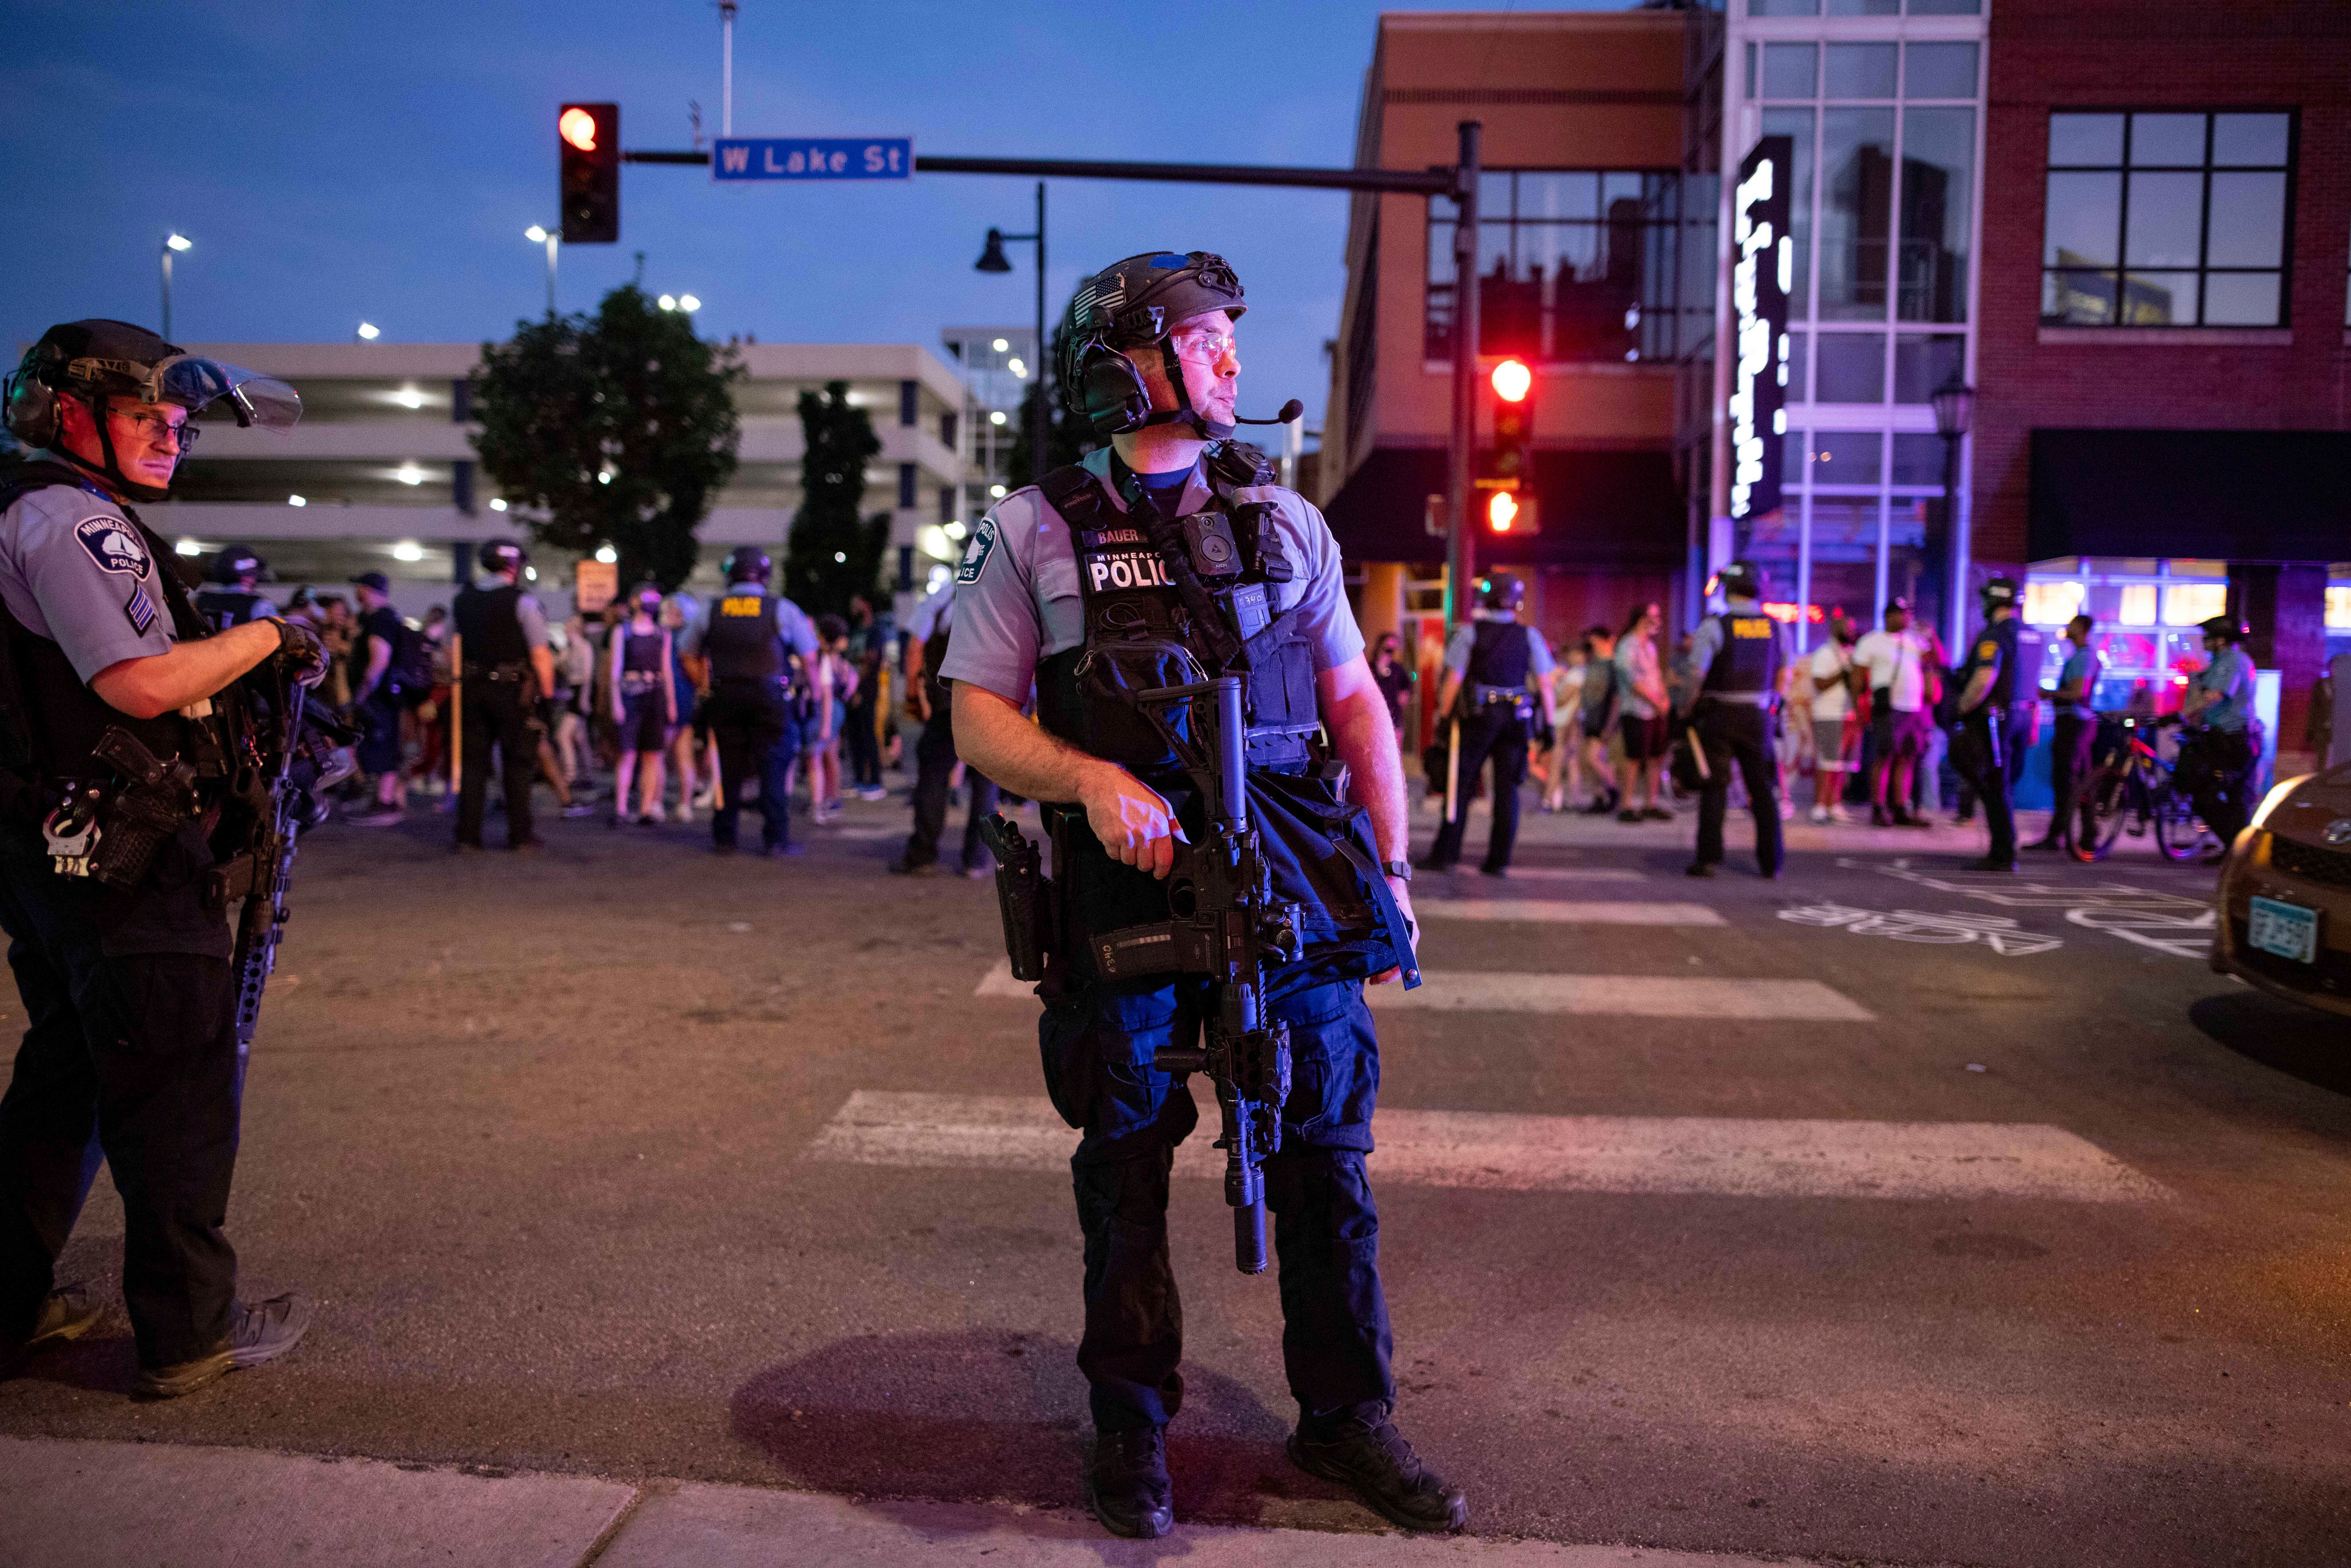 On Tuesday evening, 15 June, 2020, heavily armed Minneapolis police cleared out a memorial site for Winston Smith, a Black man killed by local sheriff’s earlier this month under murky circumstances.